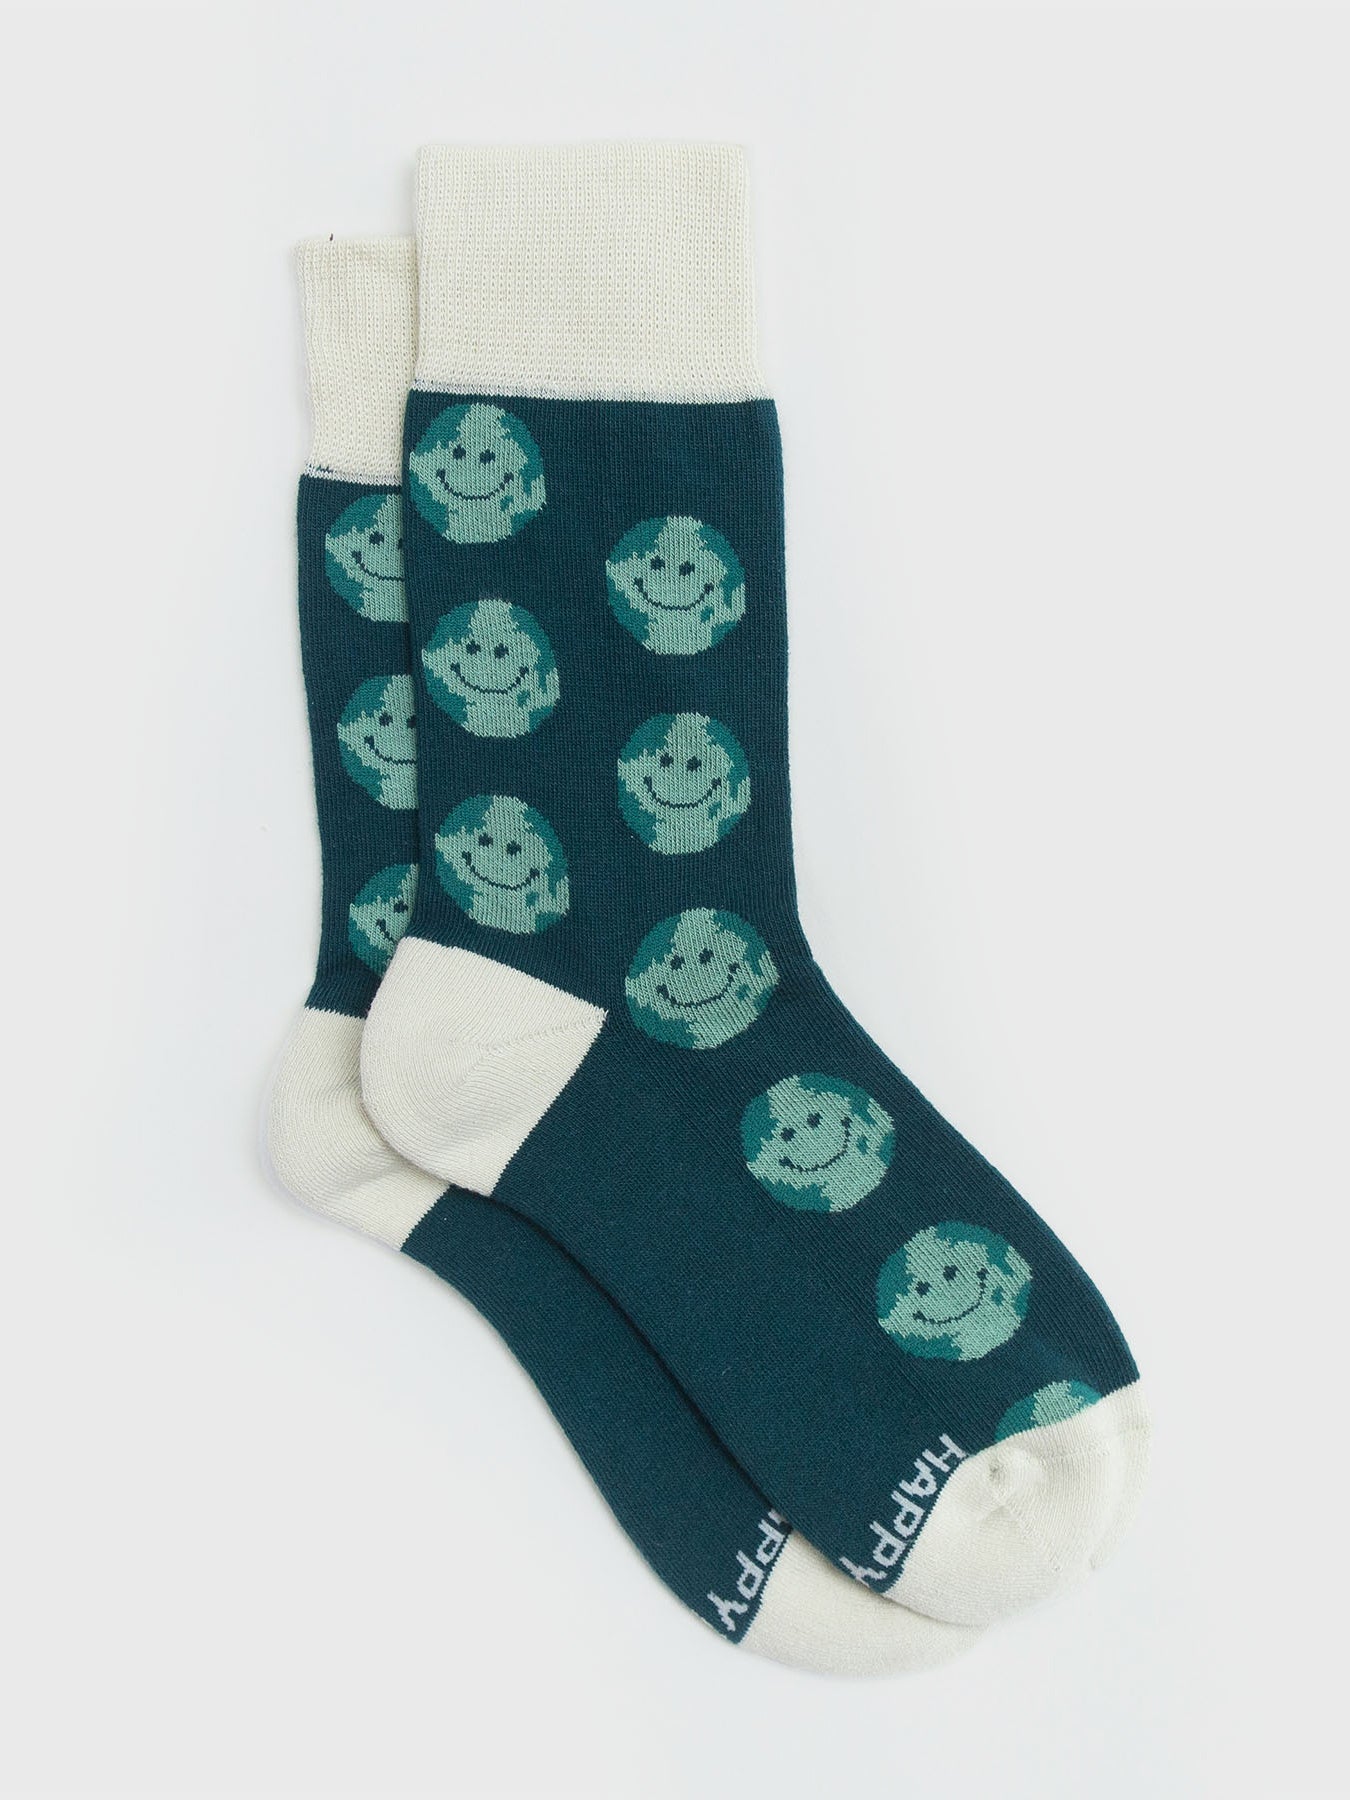 Smiley Planet Socks by Happy Earth